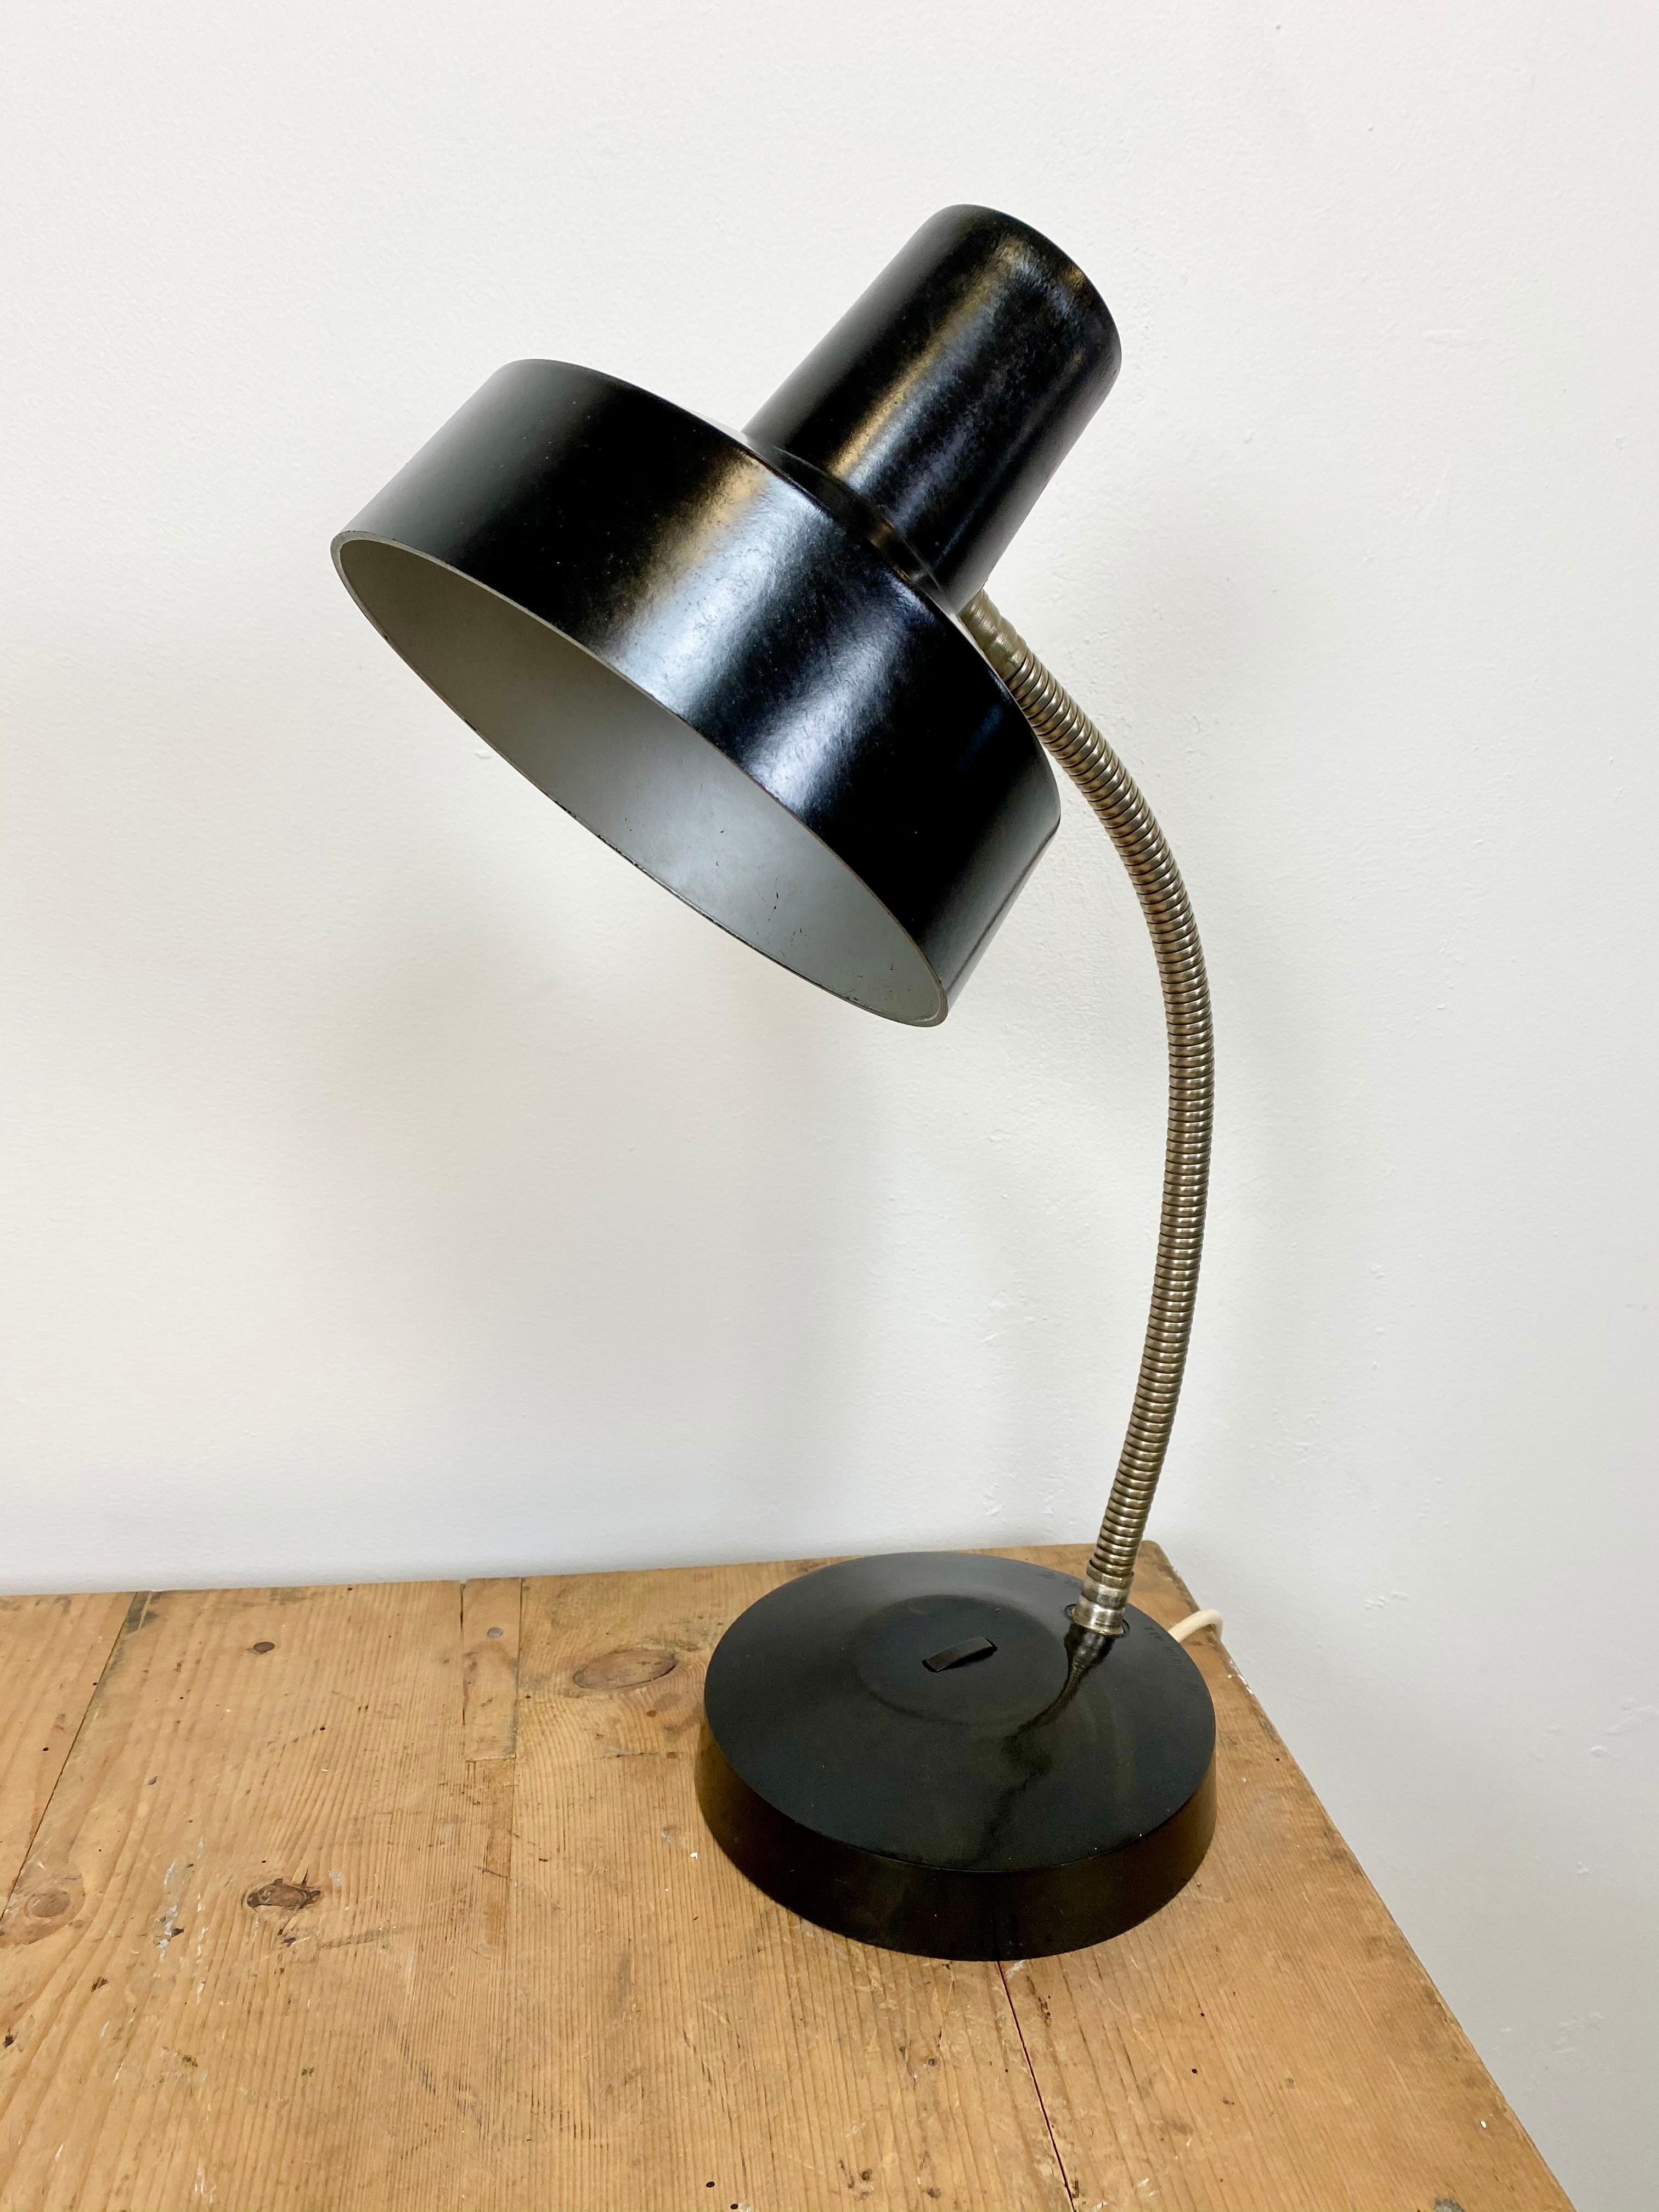 Vintage industrial bakelite adjustable desk lamp made by Elektrosvit in former Czechoslovakia during the 1960s. It features a black bakelite shade and base and a chrome plated gooseneck arm. The original socket requires E 27 lightbulb. The lampshade